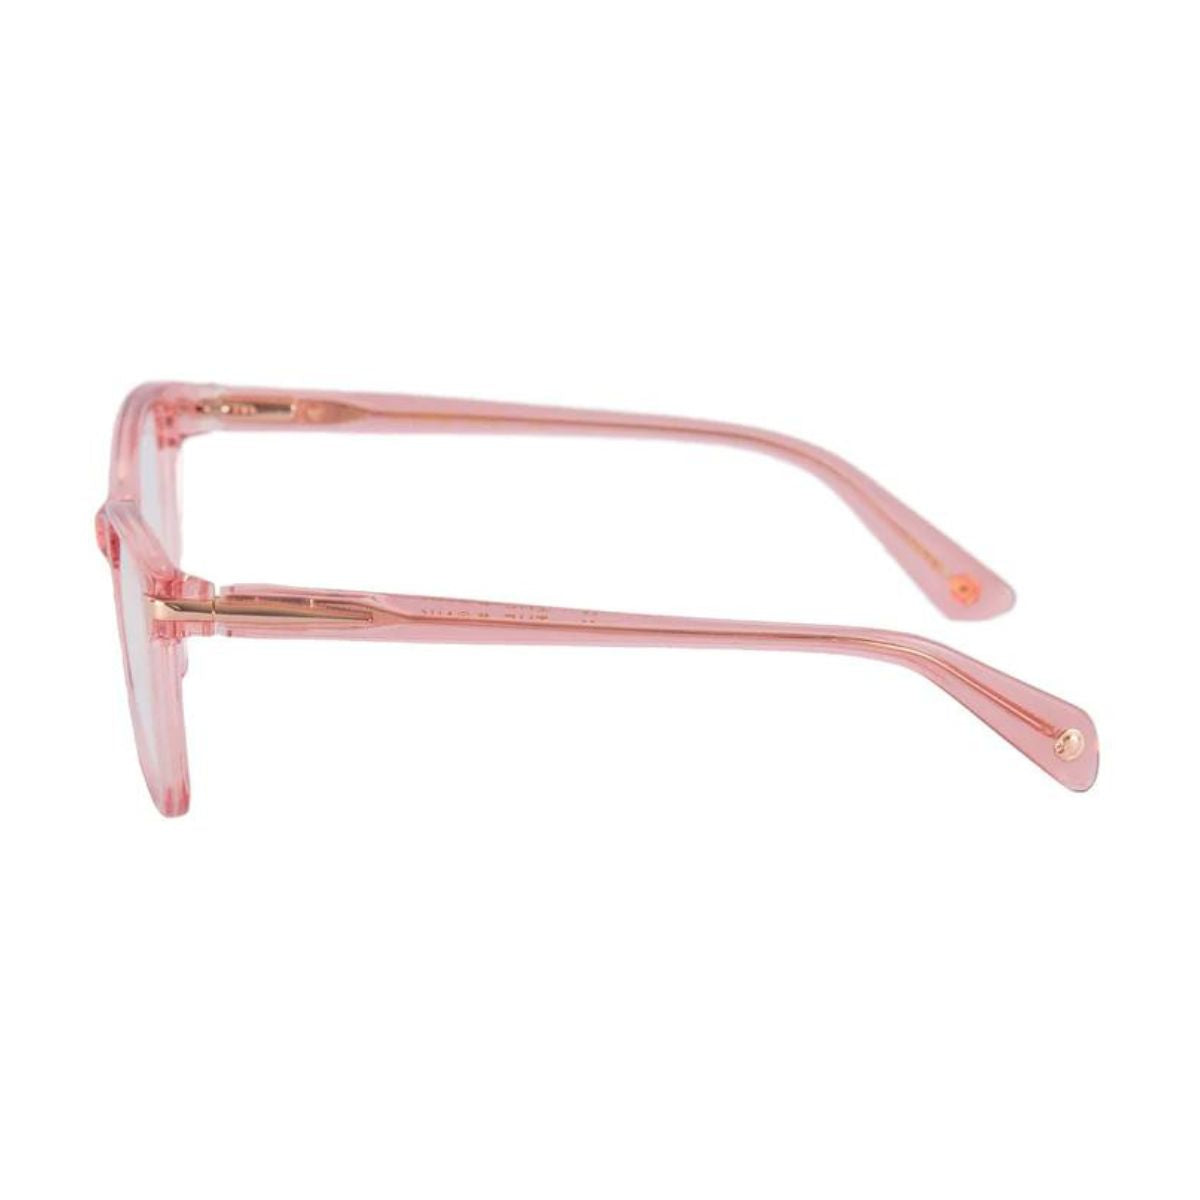 "buy The Monk Florence C4 spactacle frame for women's at optorium" 